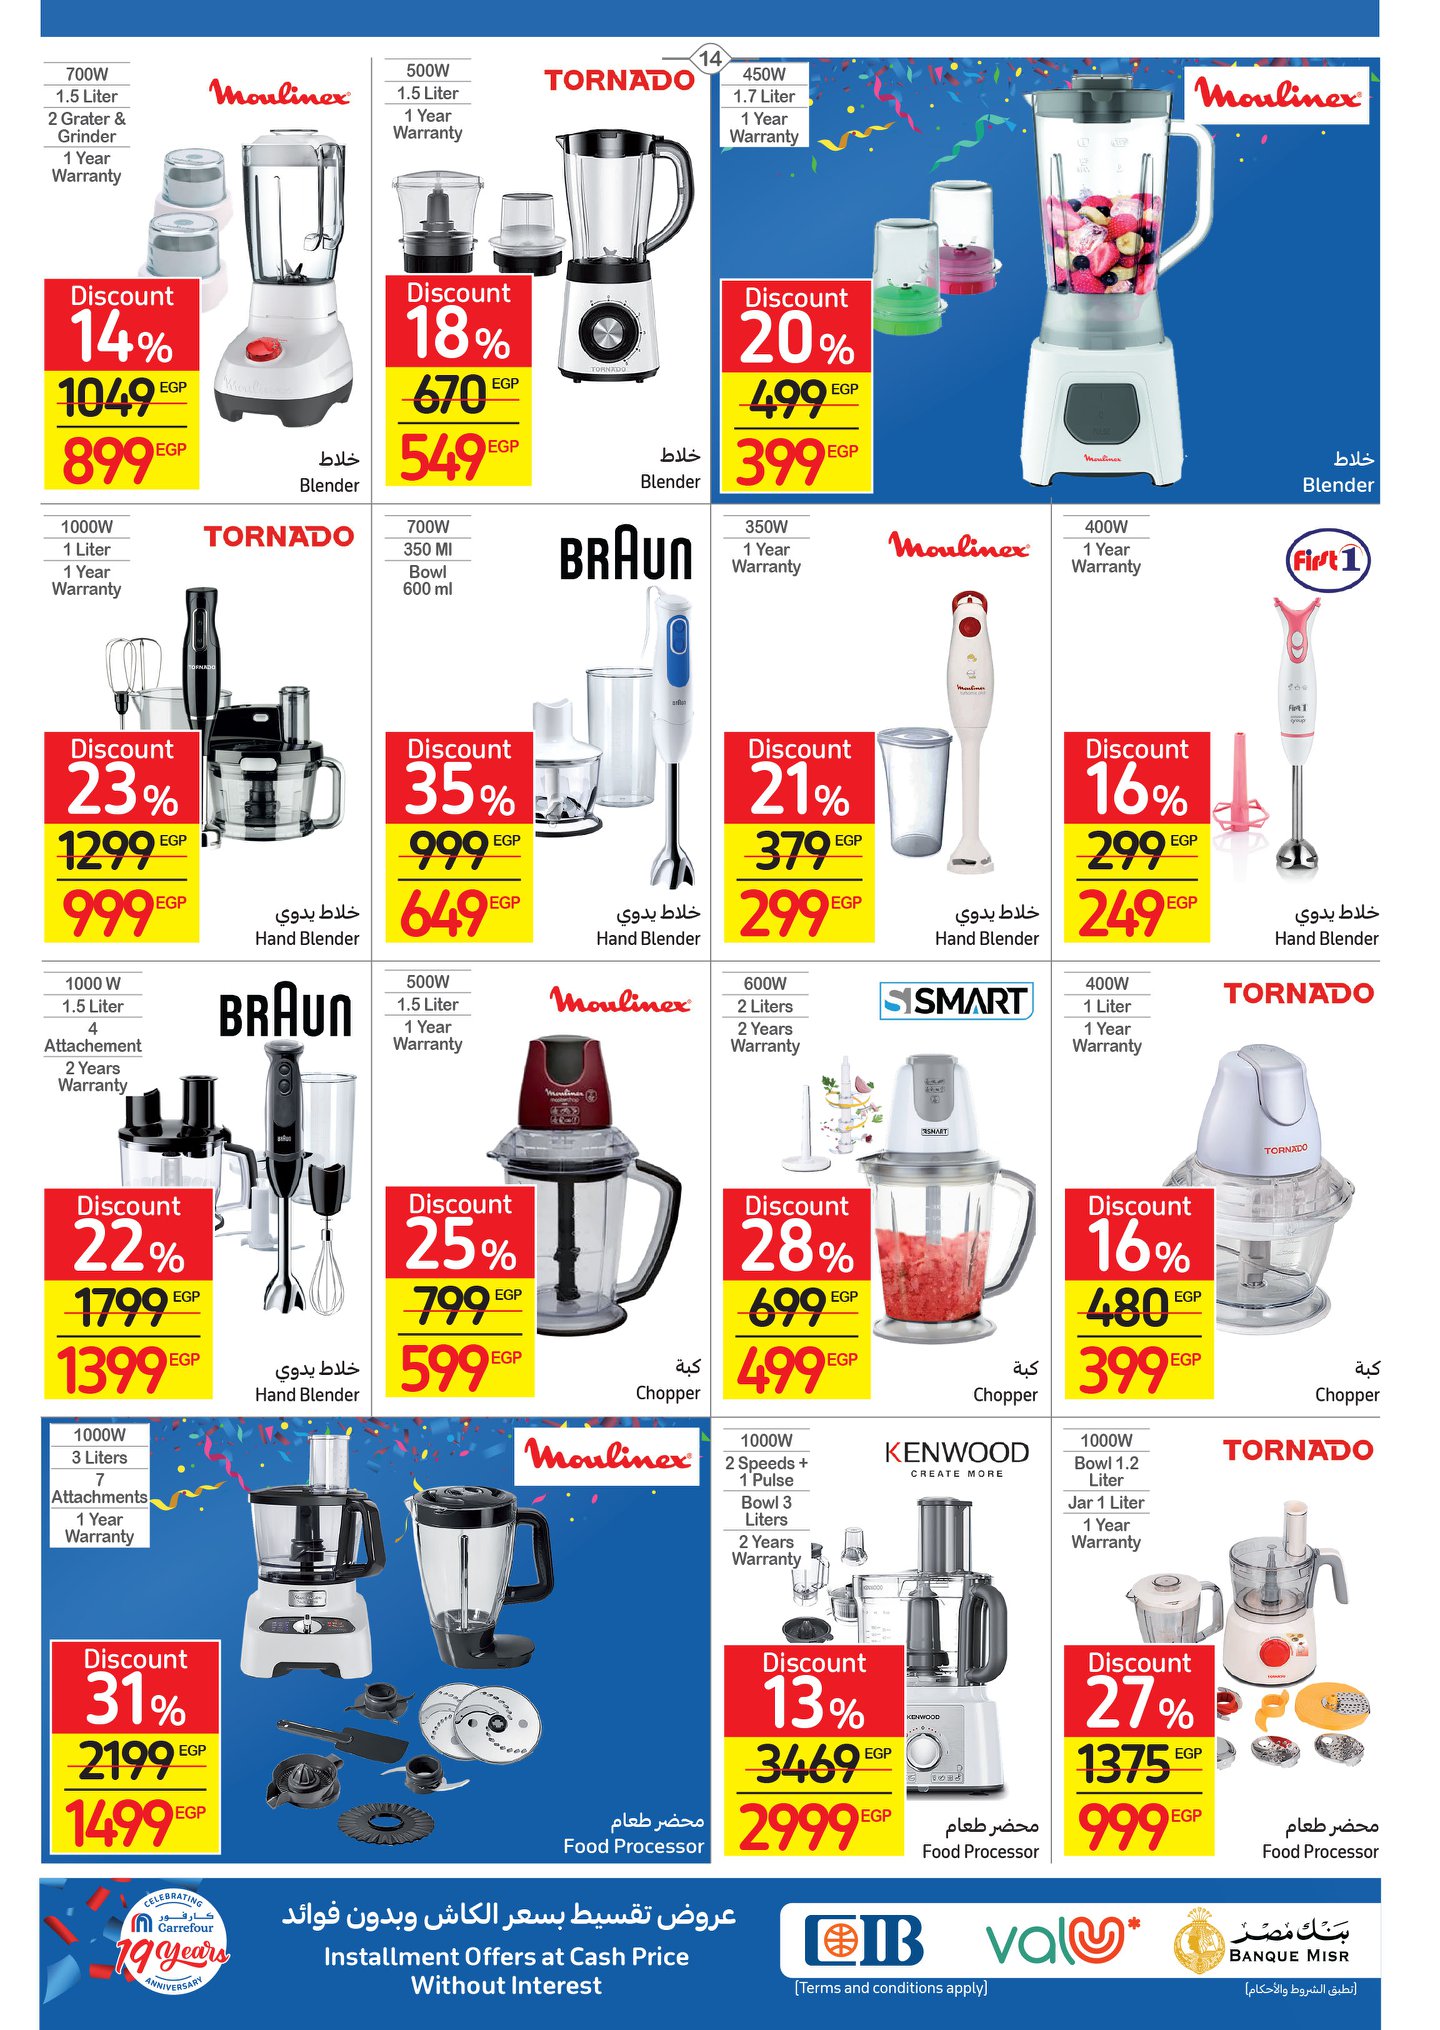 Carrefour magazine offers complete with 50% discounts and a surprise purchase in convenient installments without interest 18